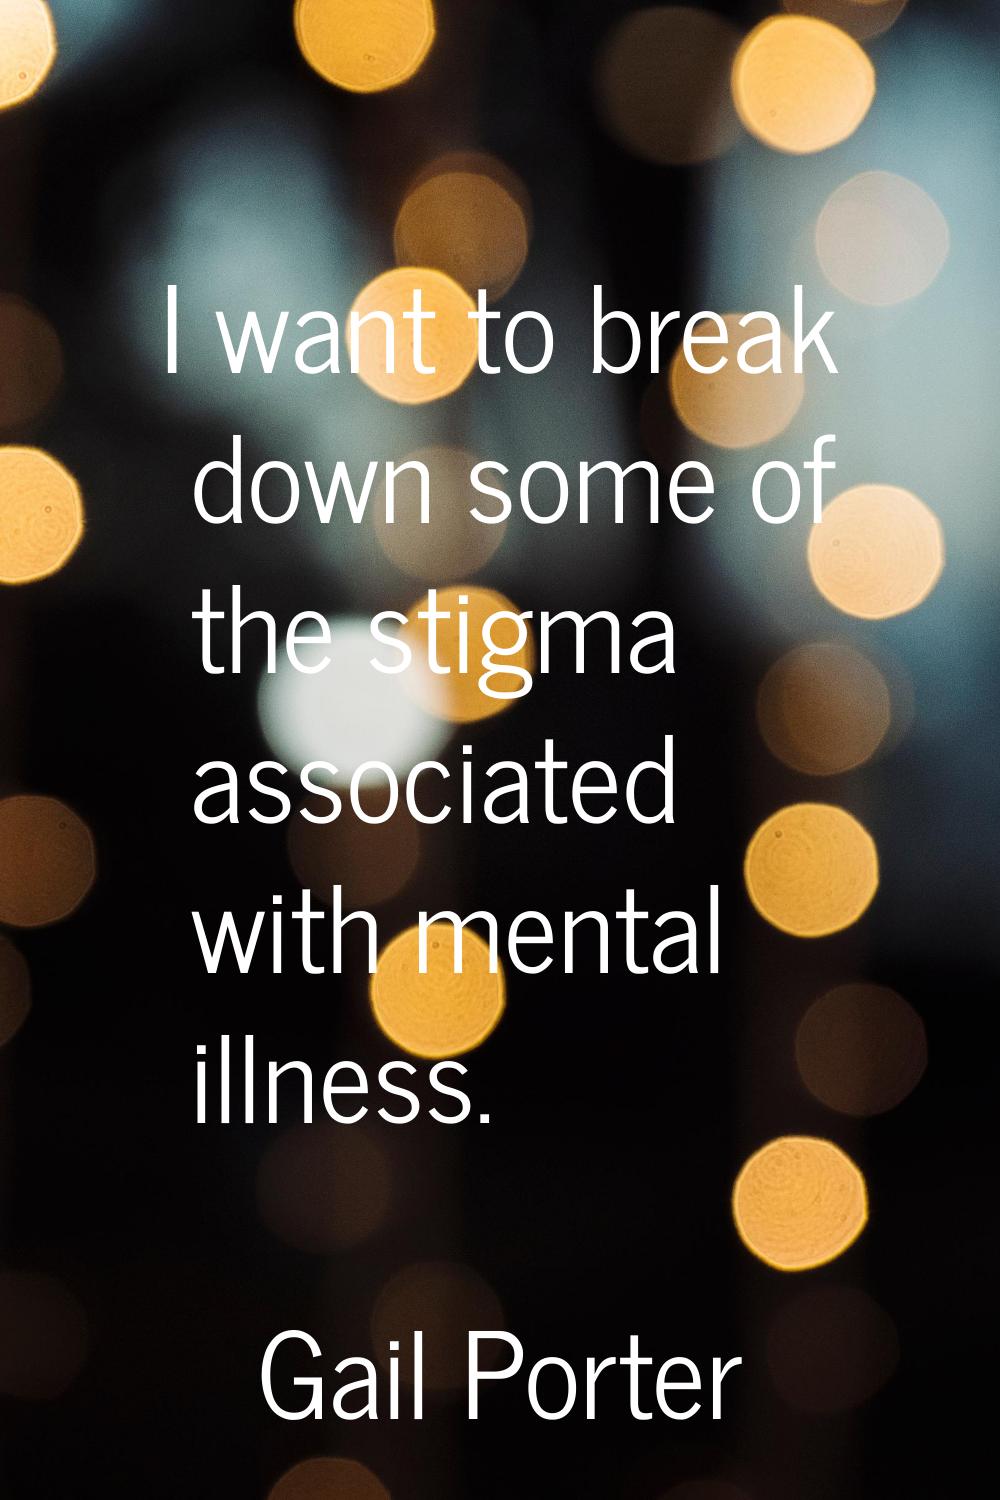 I want to break down some of the stigma associated with mental illness.